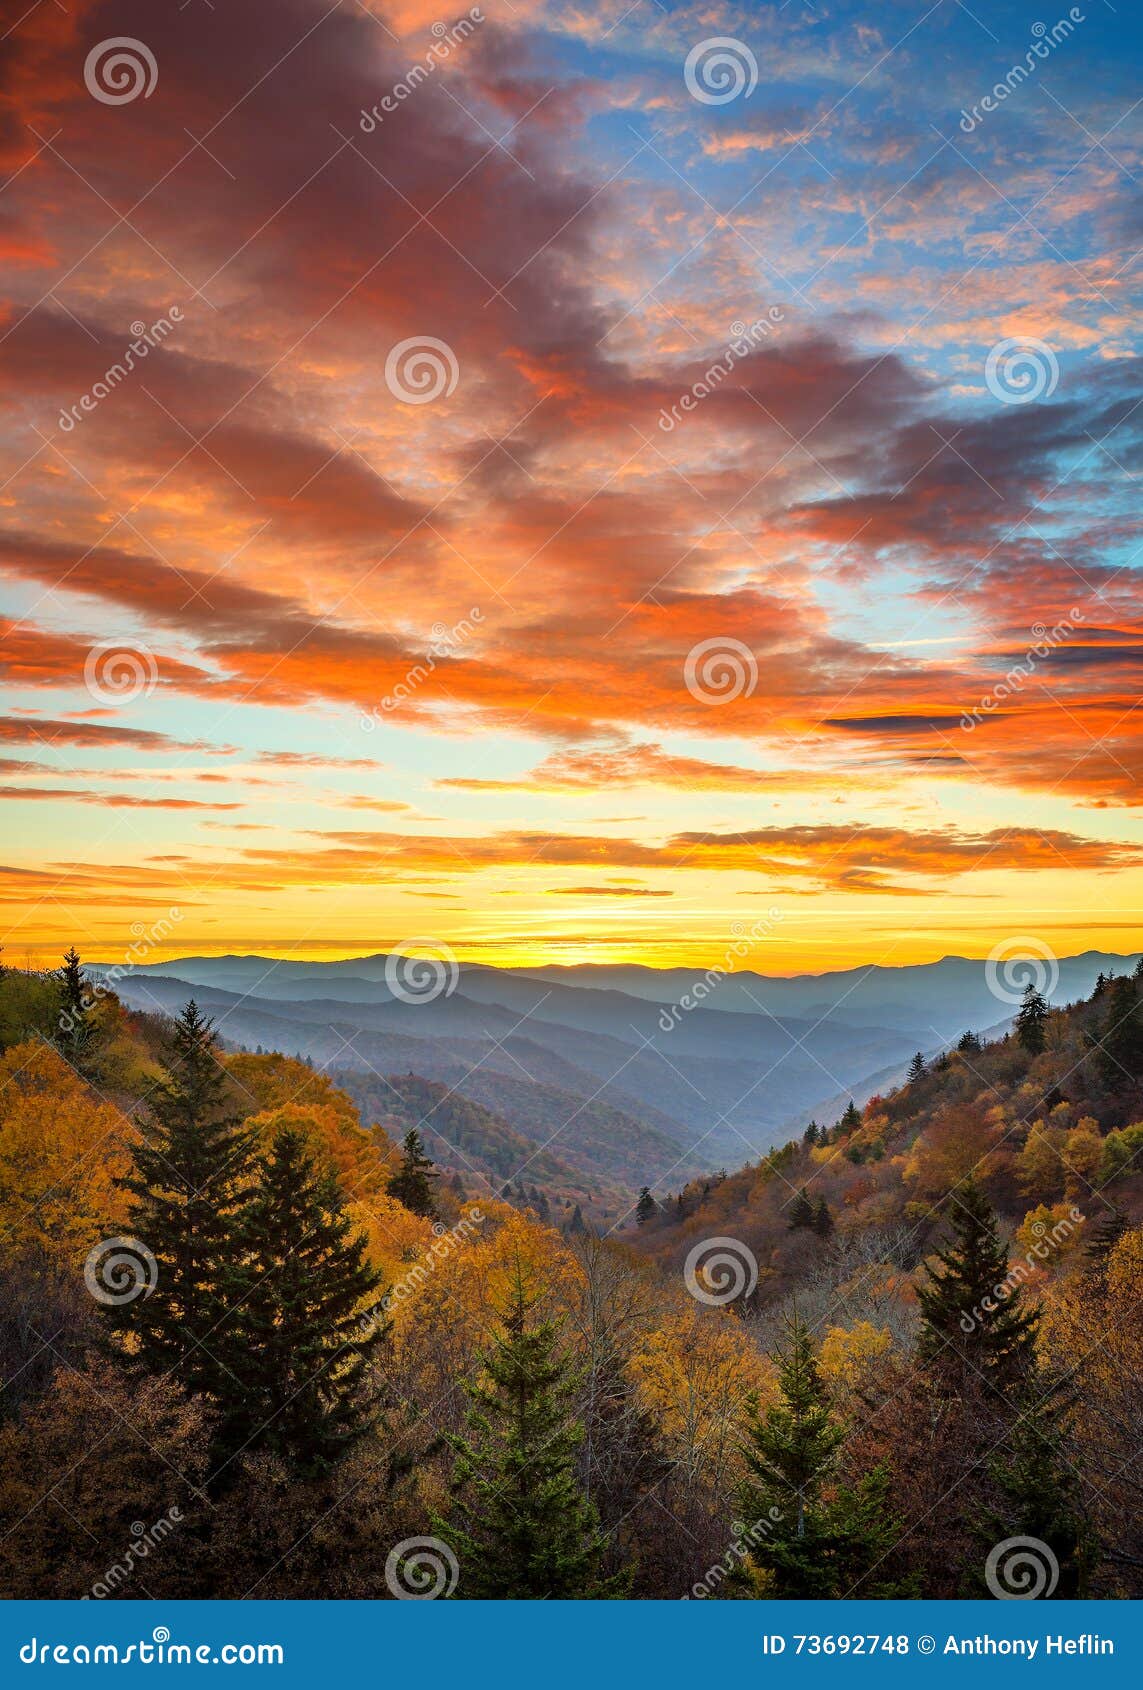 fall colors, scenic sunrise, great smoky mountains